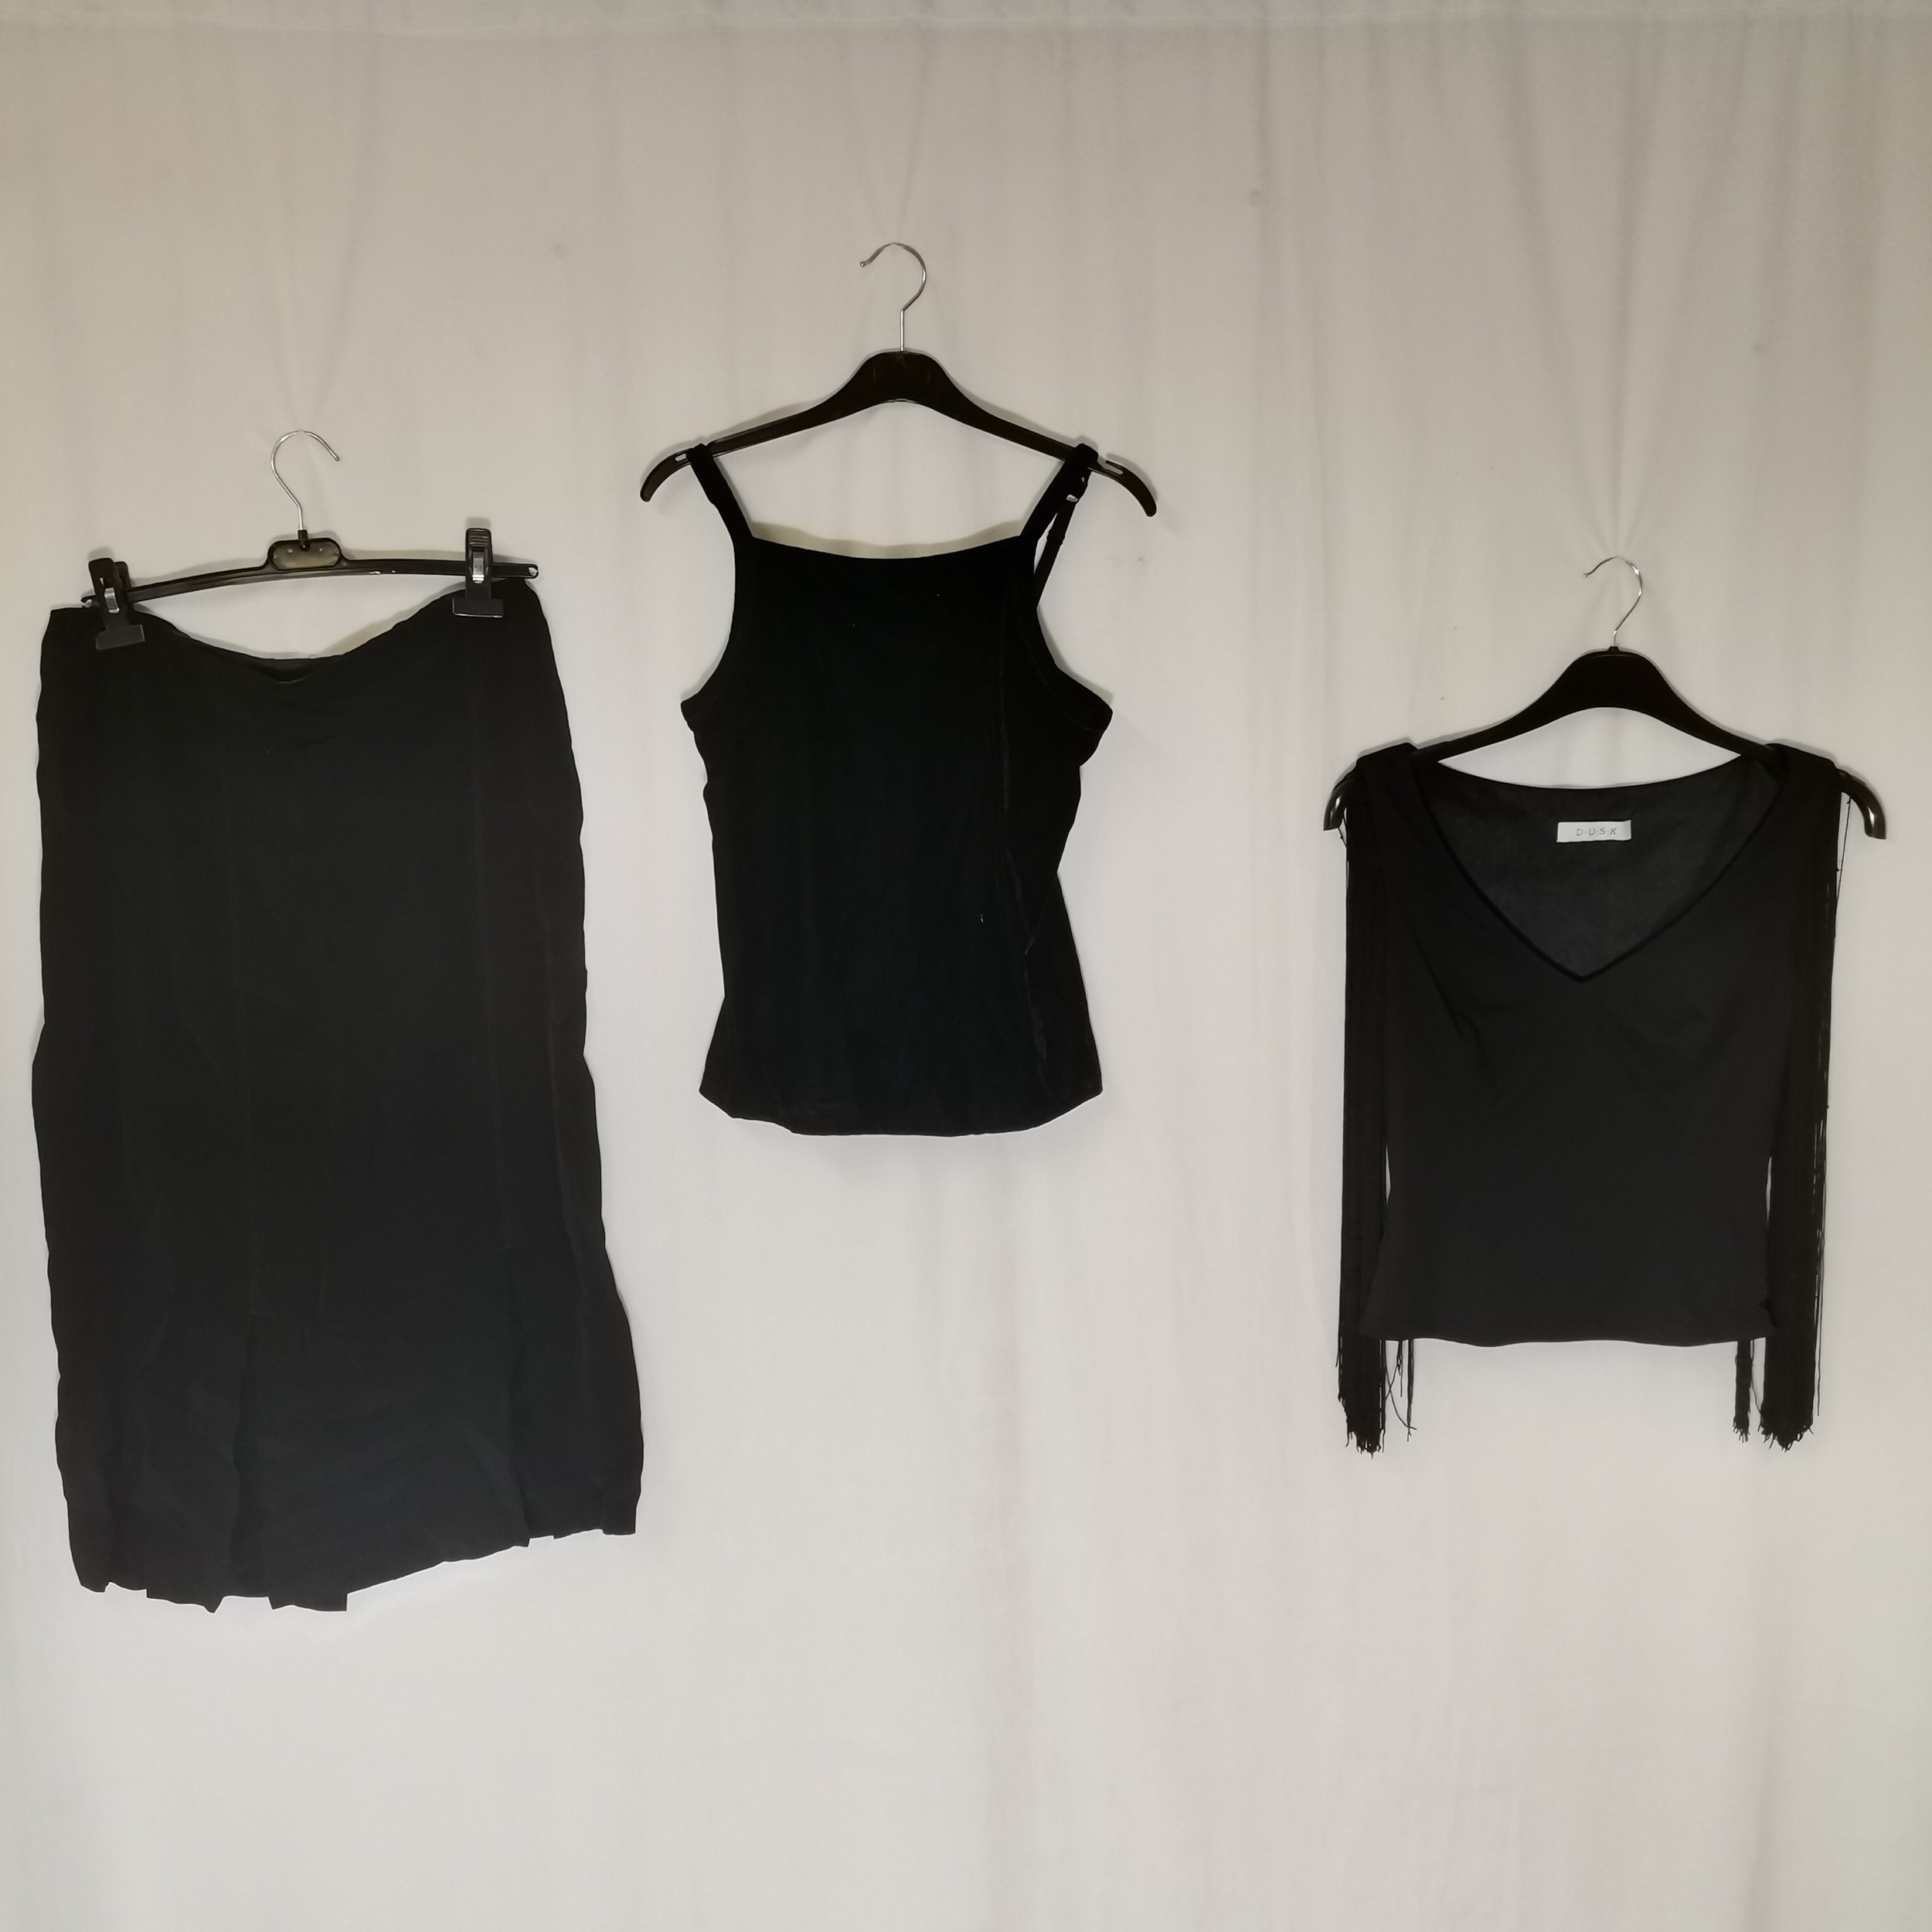 3 Black garments inc crepe skirt 80cm waist, velvet top 68cm bust and black top with fringed and